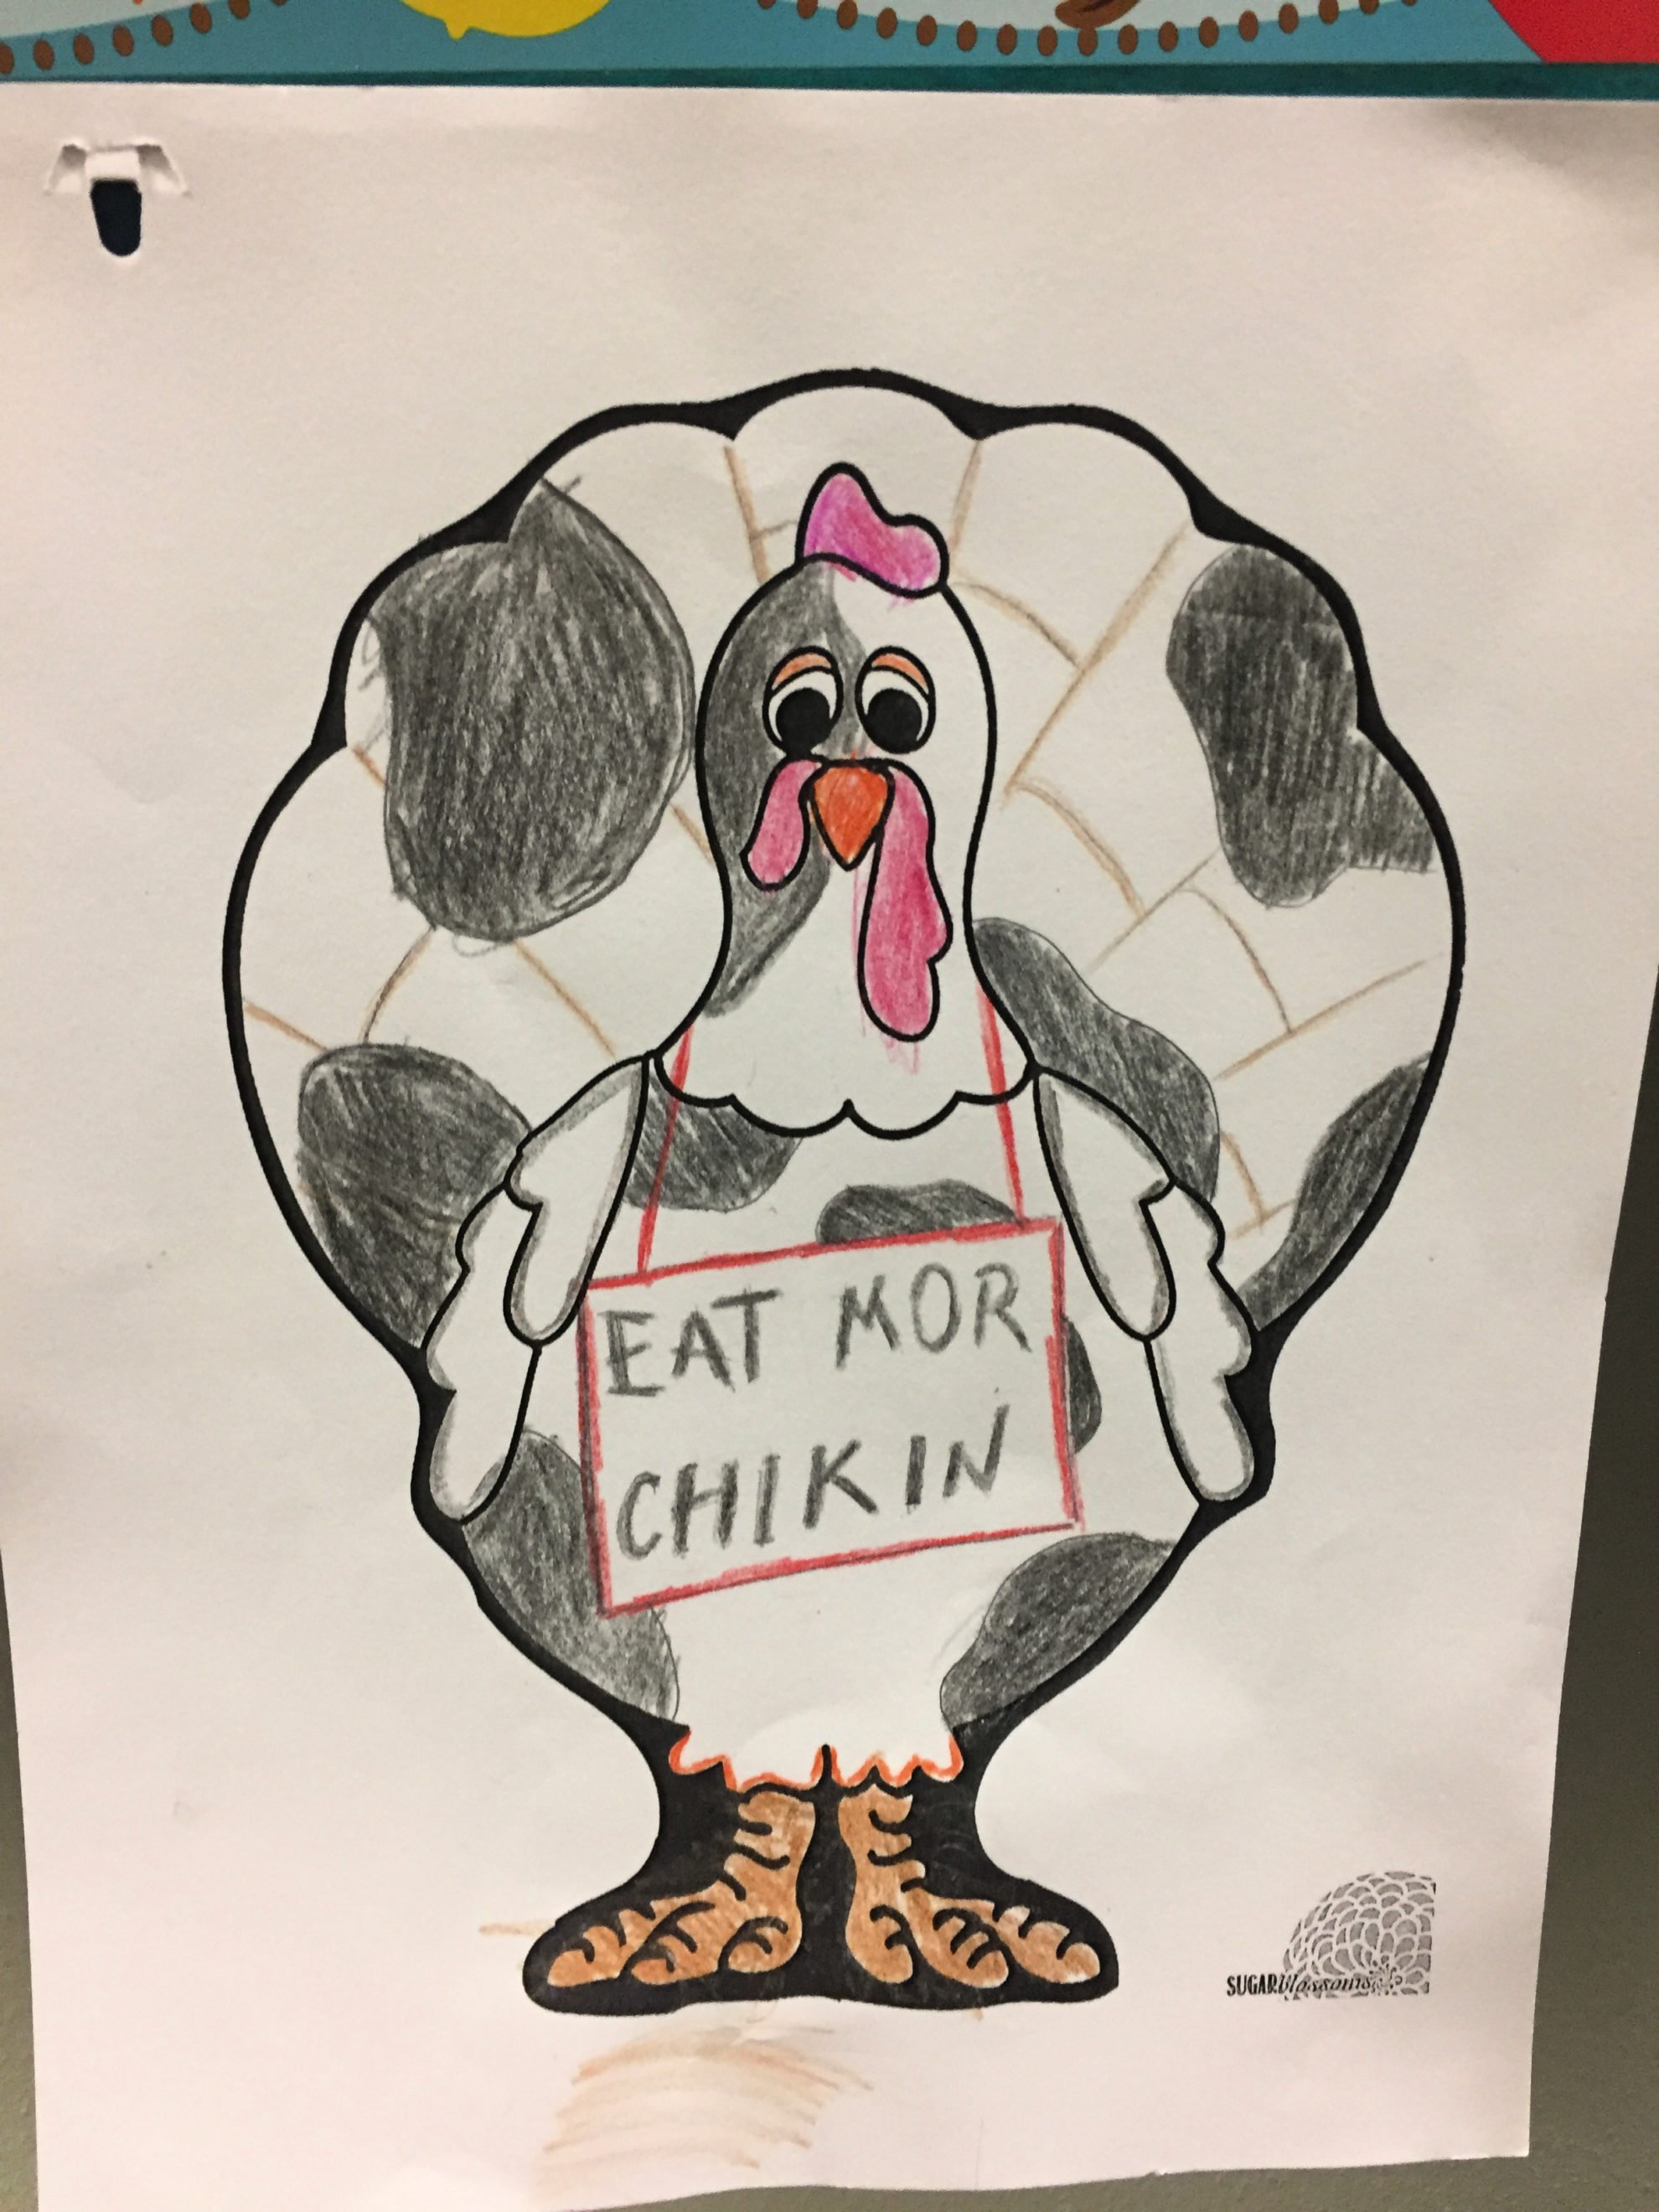 Colored with crayons, Turkey In Disguise as Eat More Chickin Chick Fill A cow.